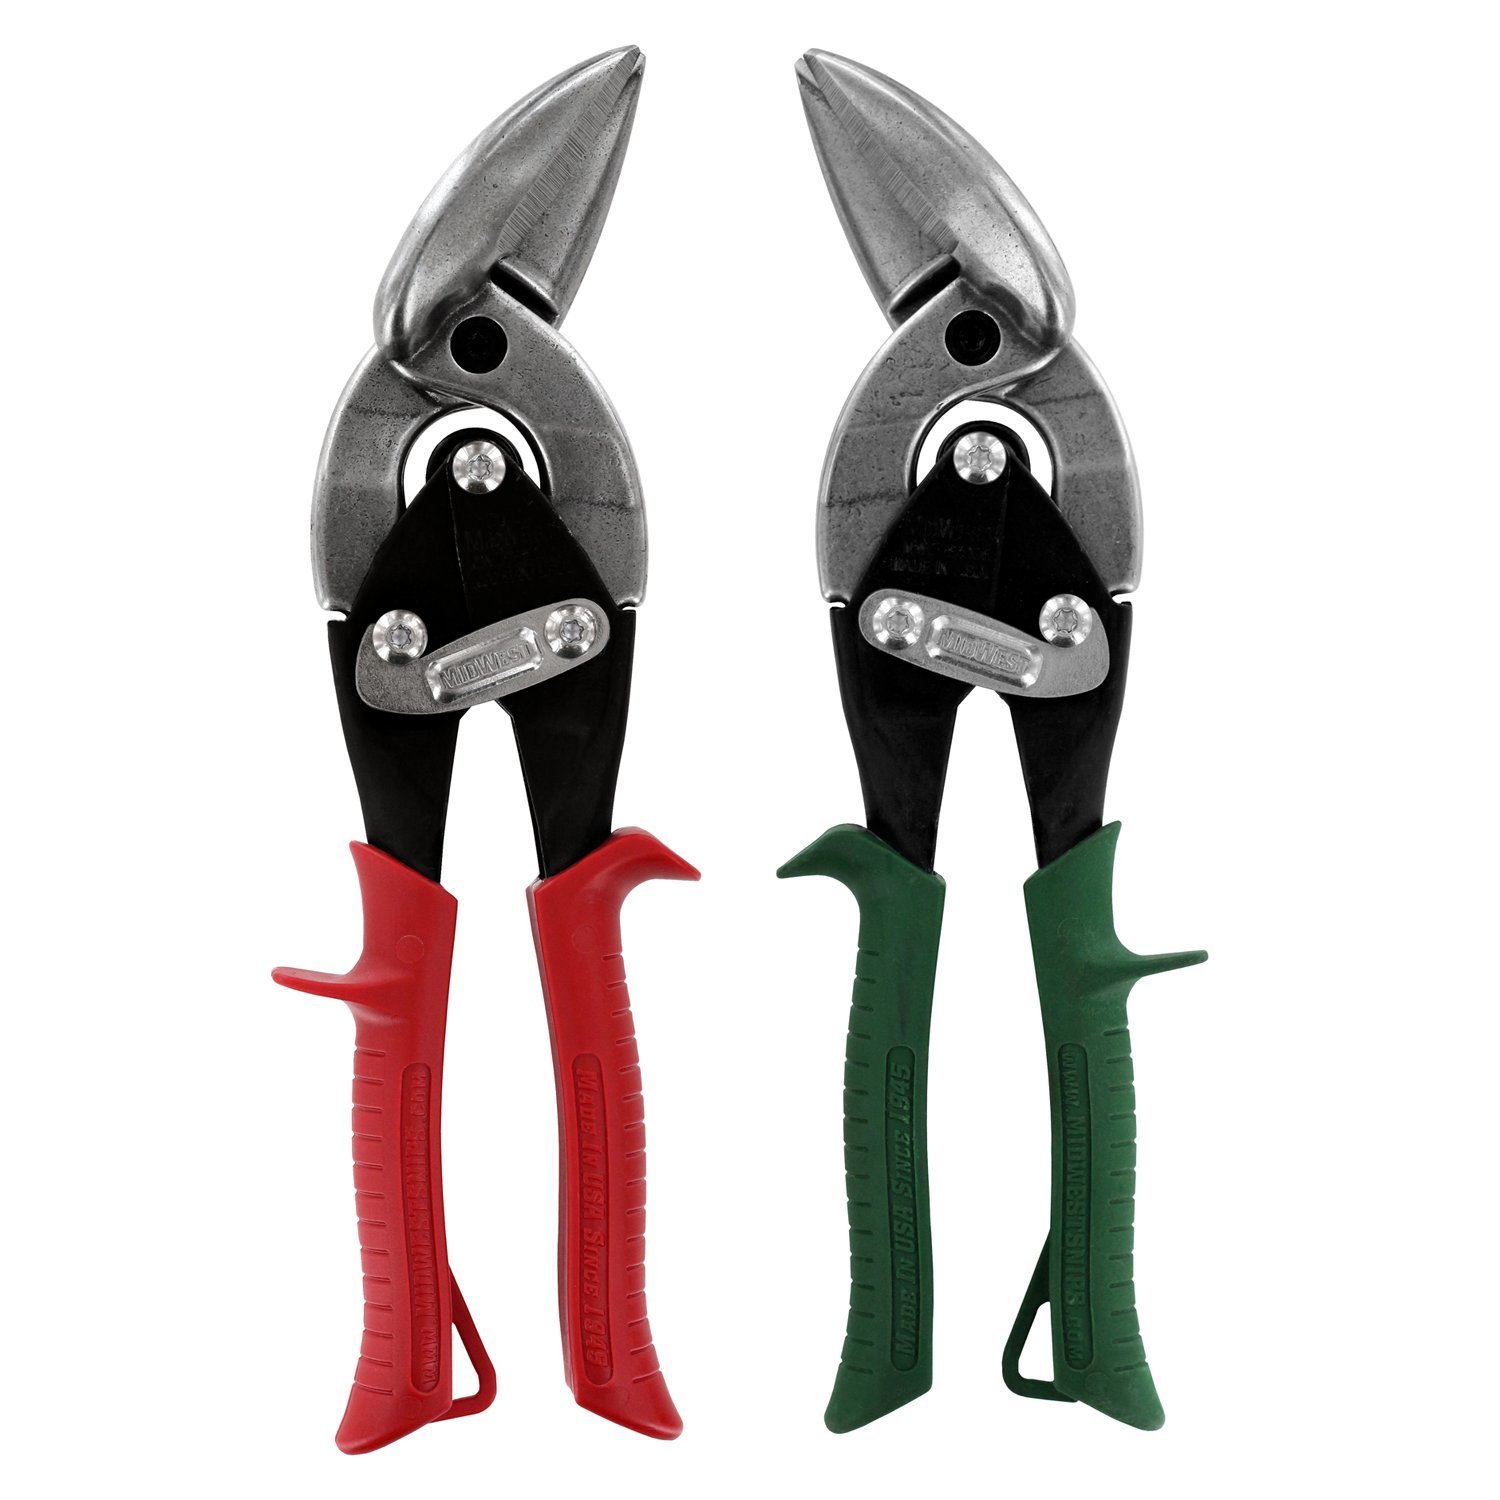 Generic Midwest Tools and Cutlery MWT-6510C Midwest Snips Forged Blade Offset Aviation Snips Set (Pack of 2)